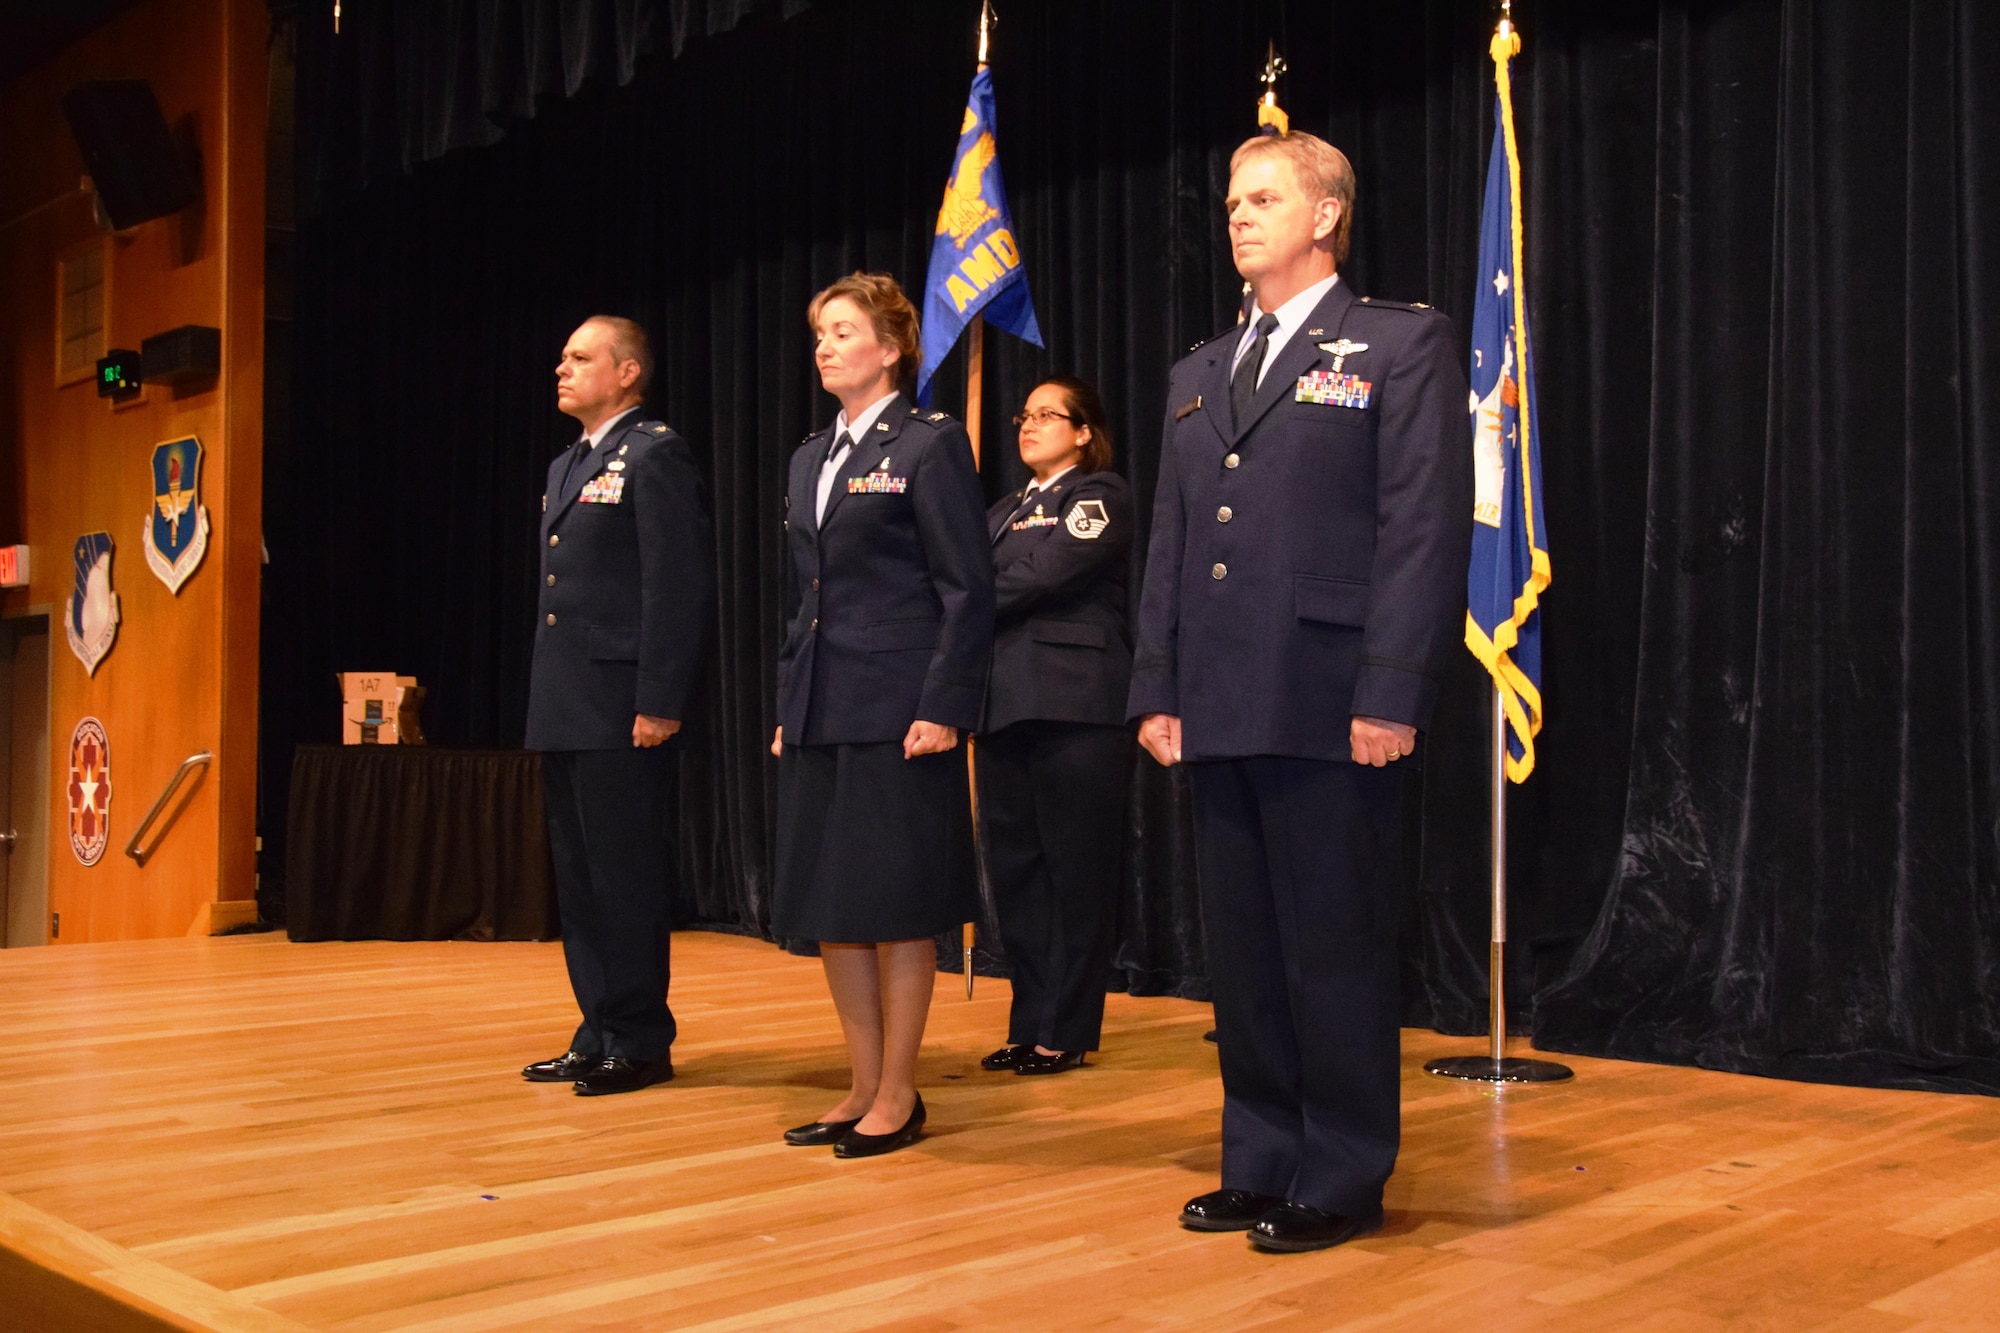 Col. Paul B. Deschner (right), the new 433rd Aerospace Medicine Squadron commander, prepares to take the reins of squadron leadership from Col. Ernest Vasquez, 433rd Medical Group commander, (far left), and Col. Julianne Flynn, (center),  during a change of command ceremony at Joint Base San Antonio-Lackland, Texas,  Aug. 6, 2017.